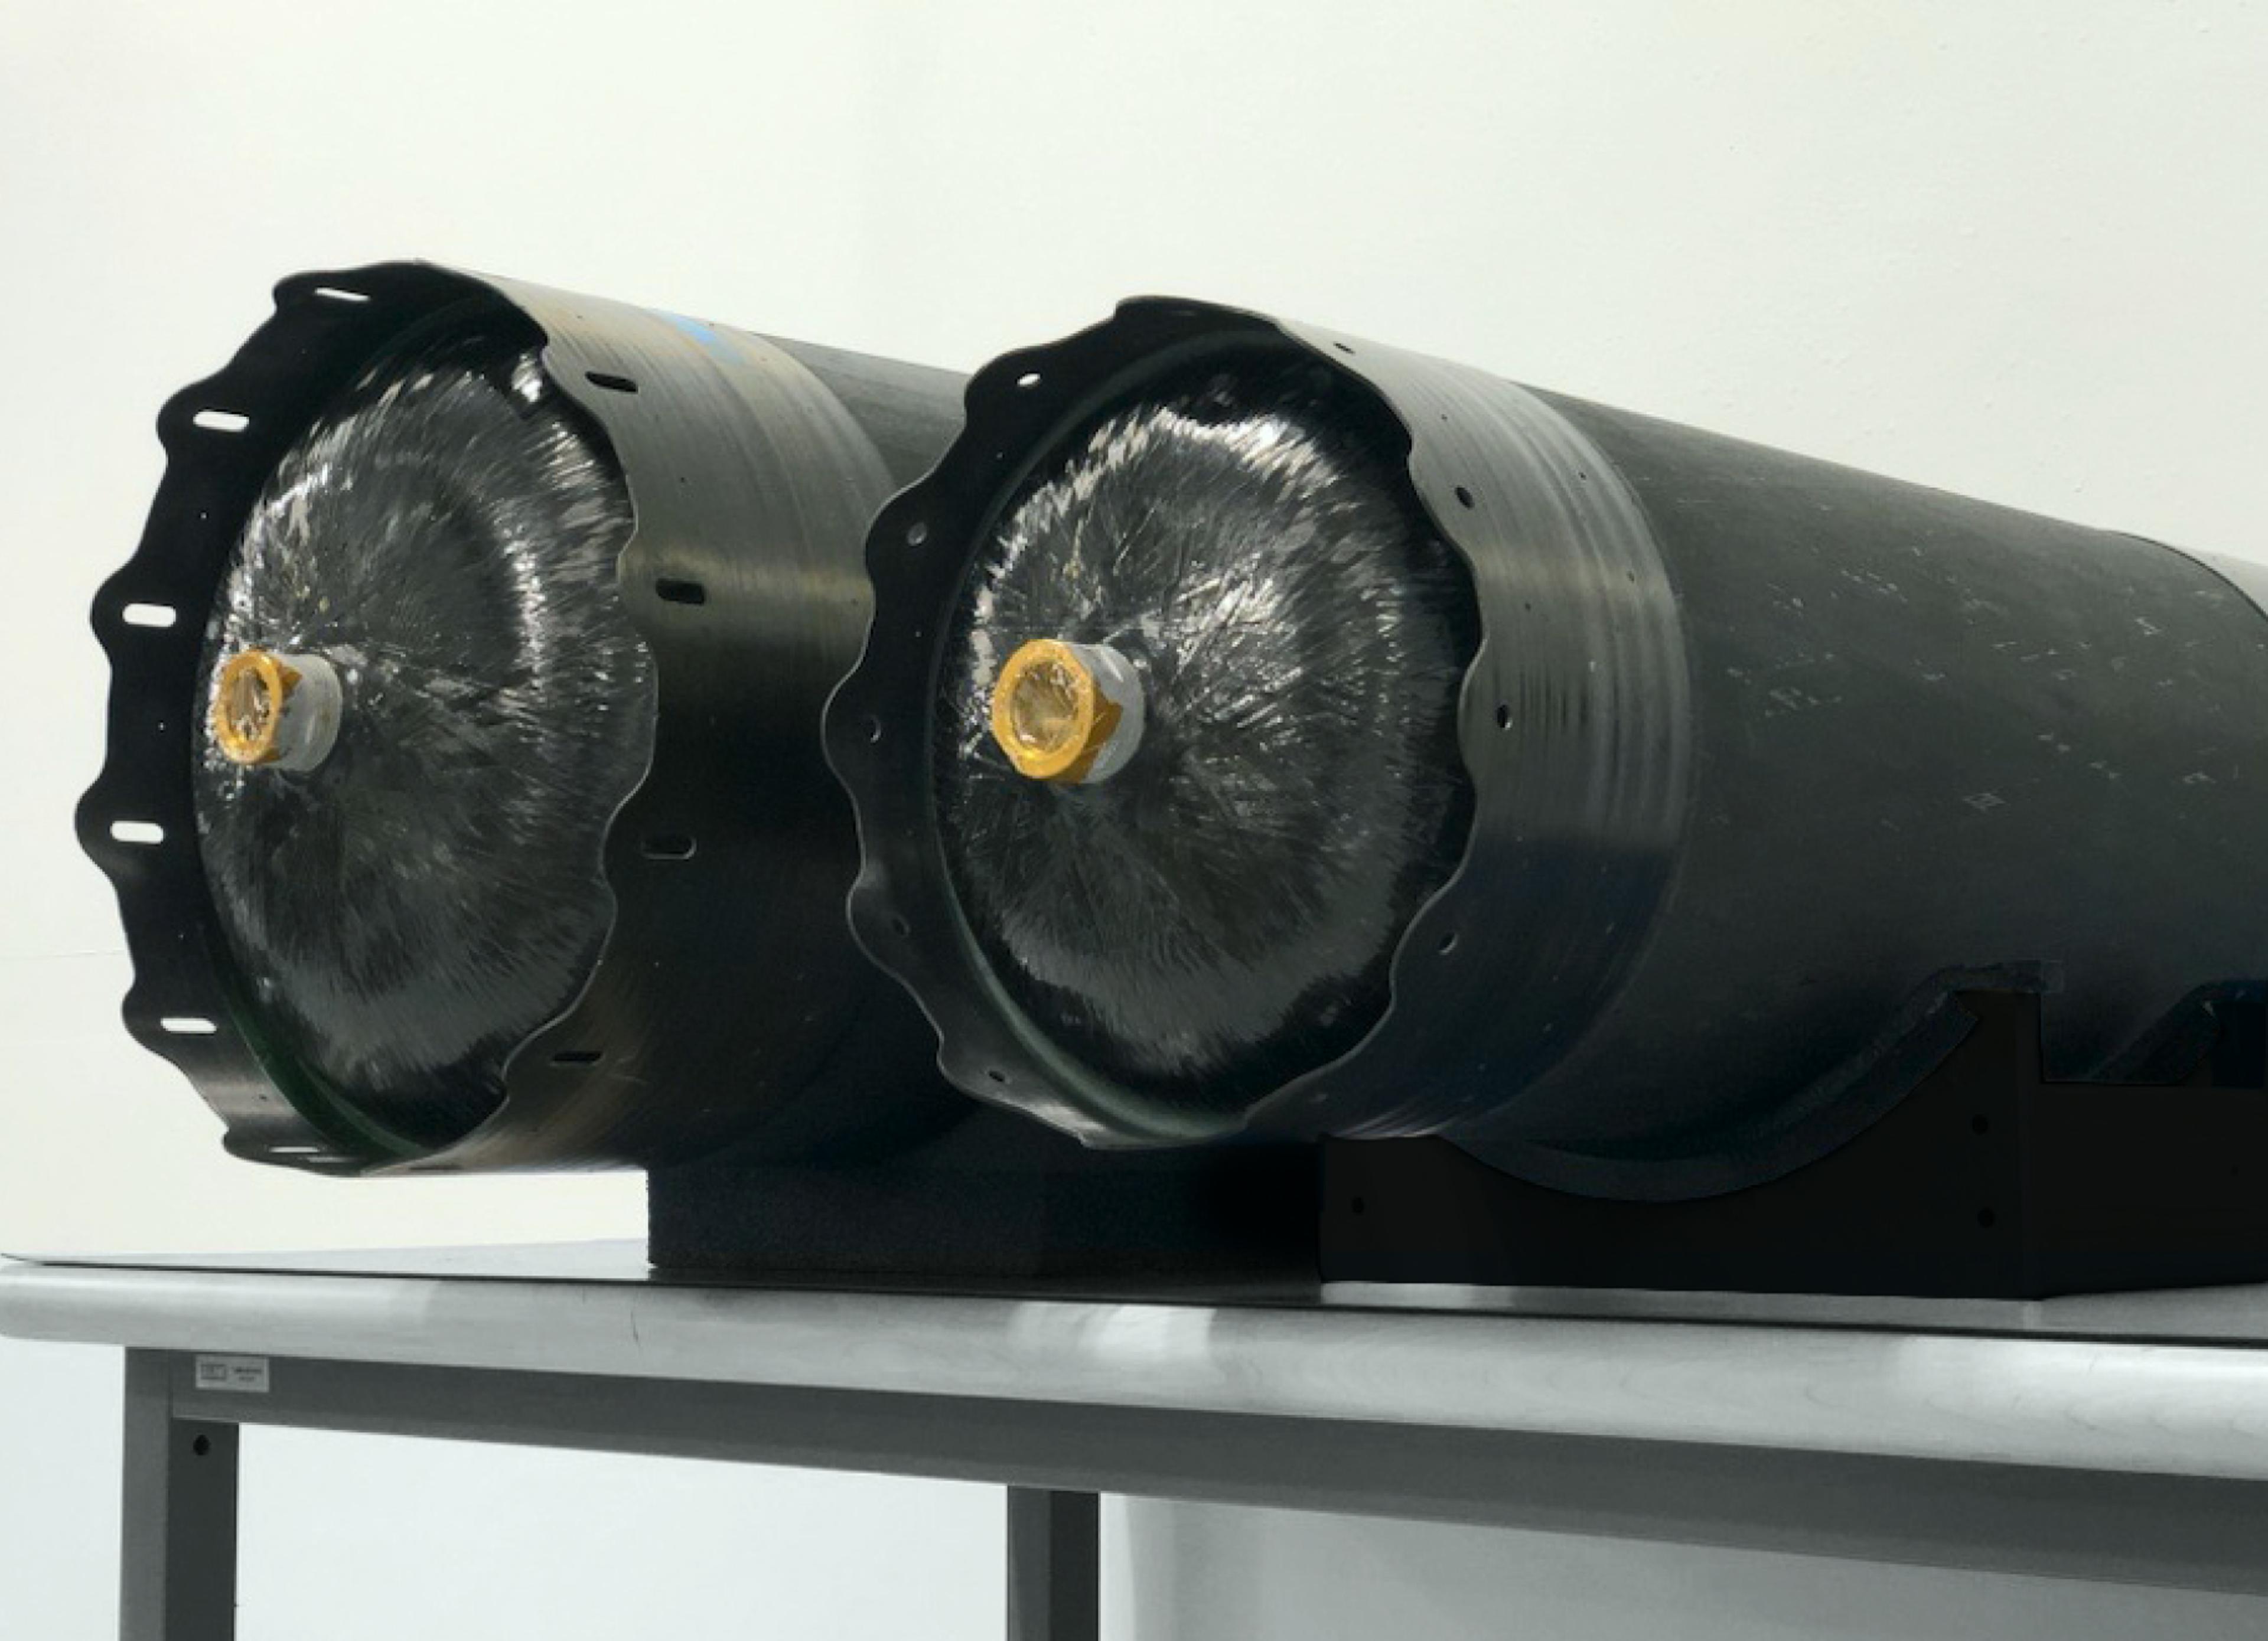 In-house composite overwrapped propellant tanks